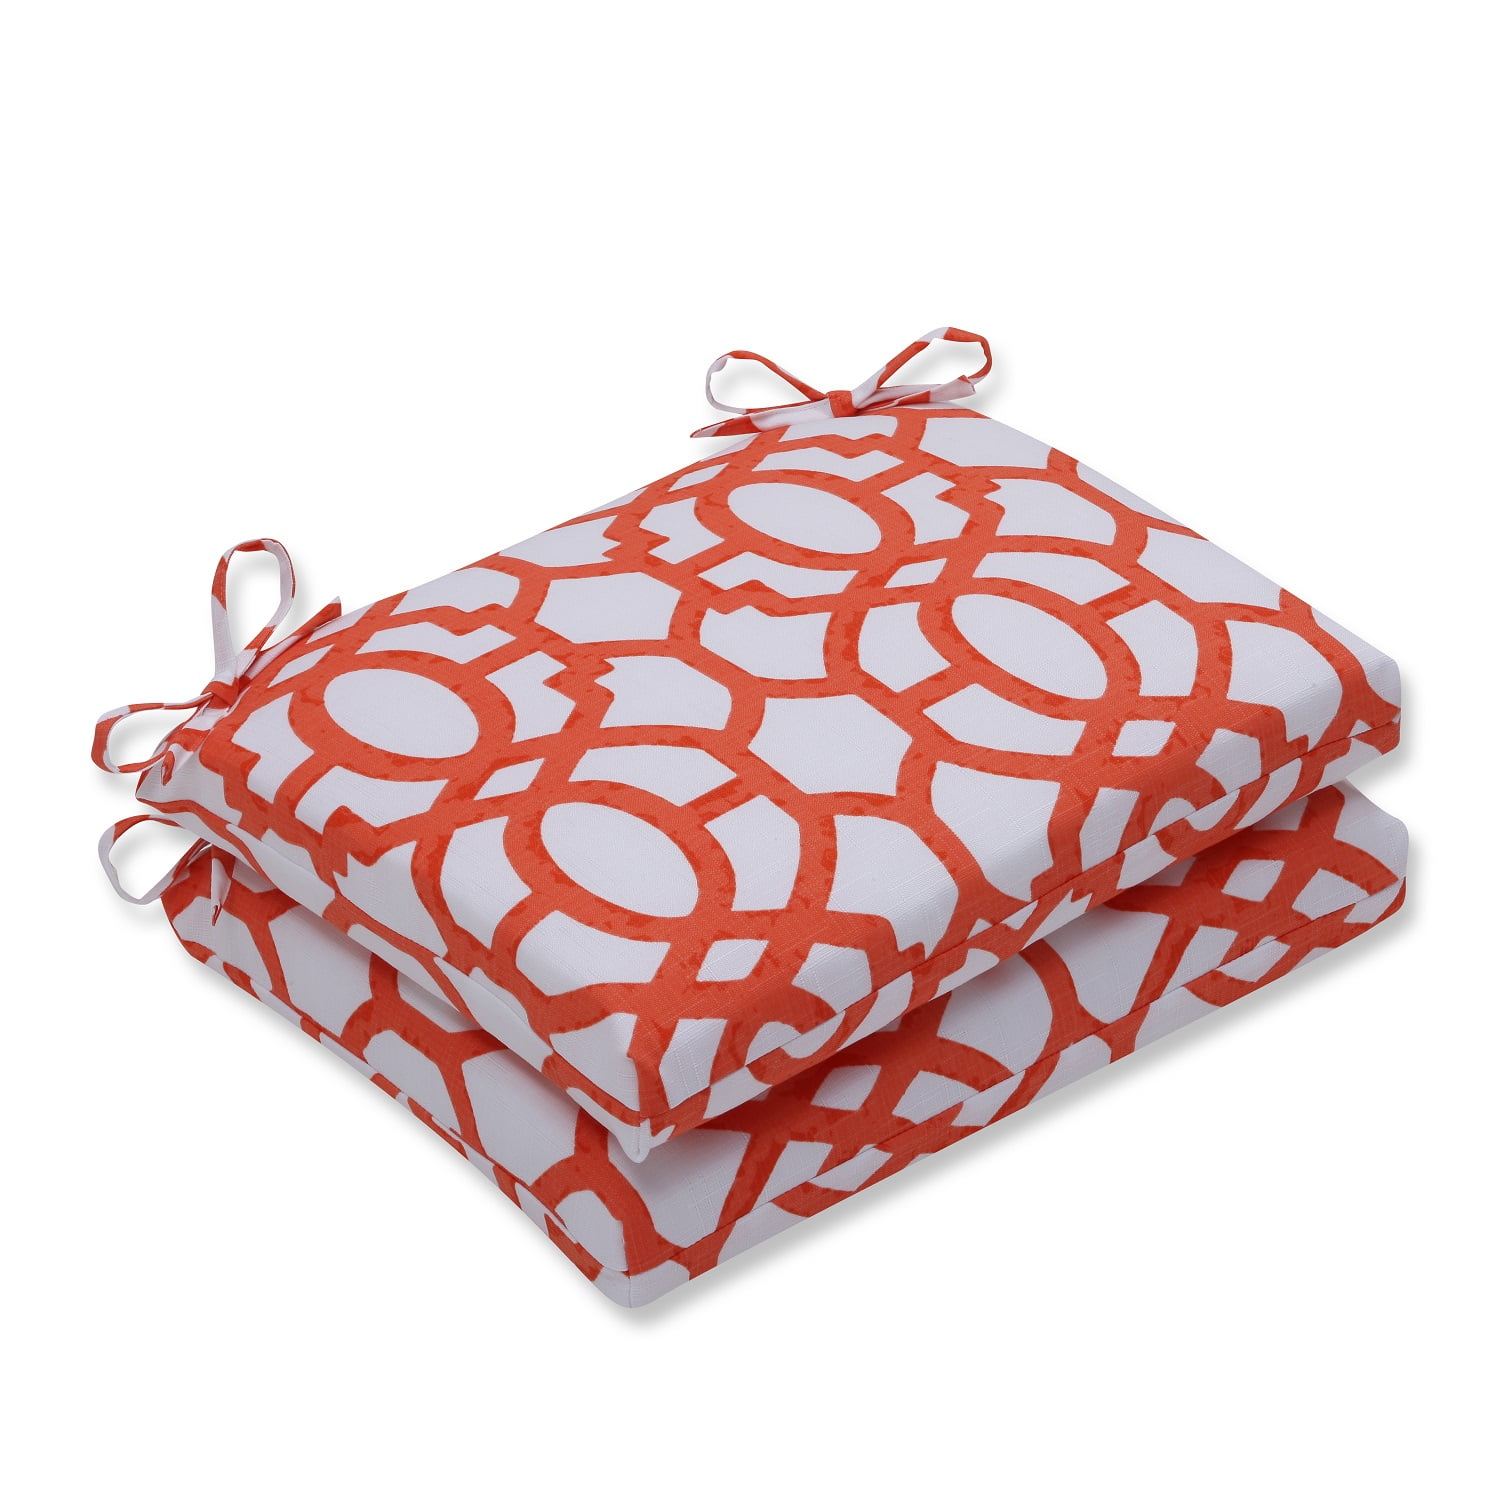 Set of 2 Geometric Design Orange Outdoor Patio Chair Seat Cushions with